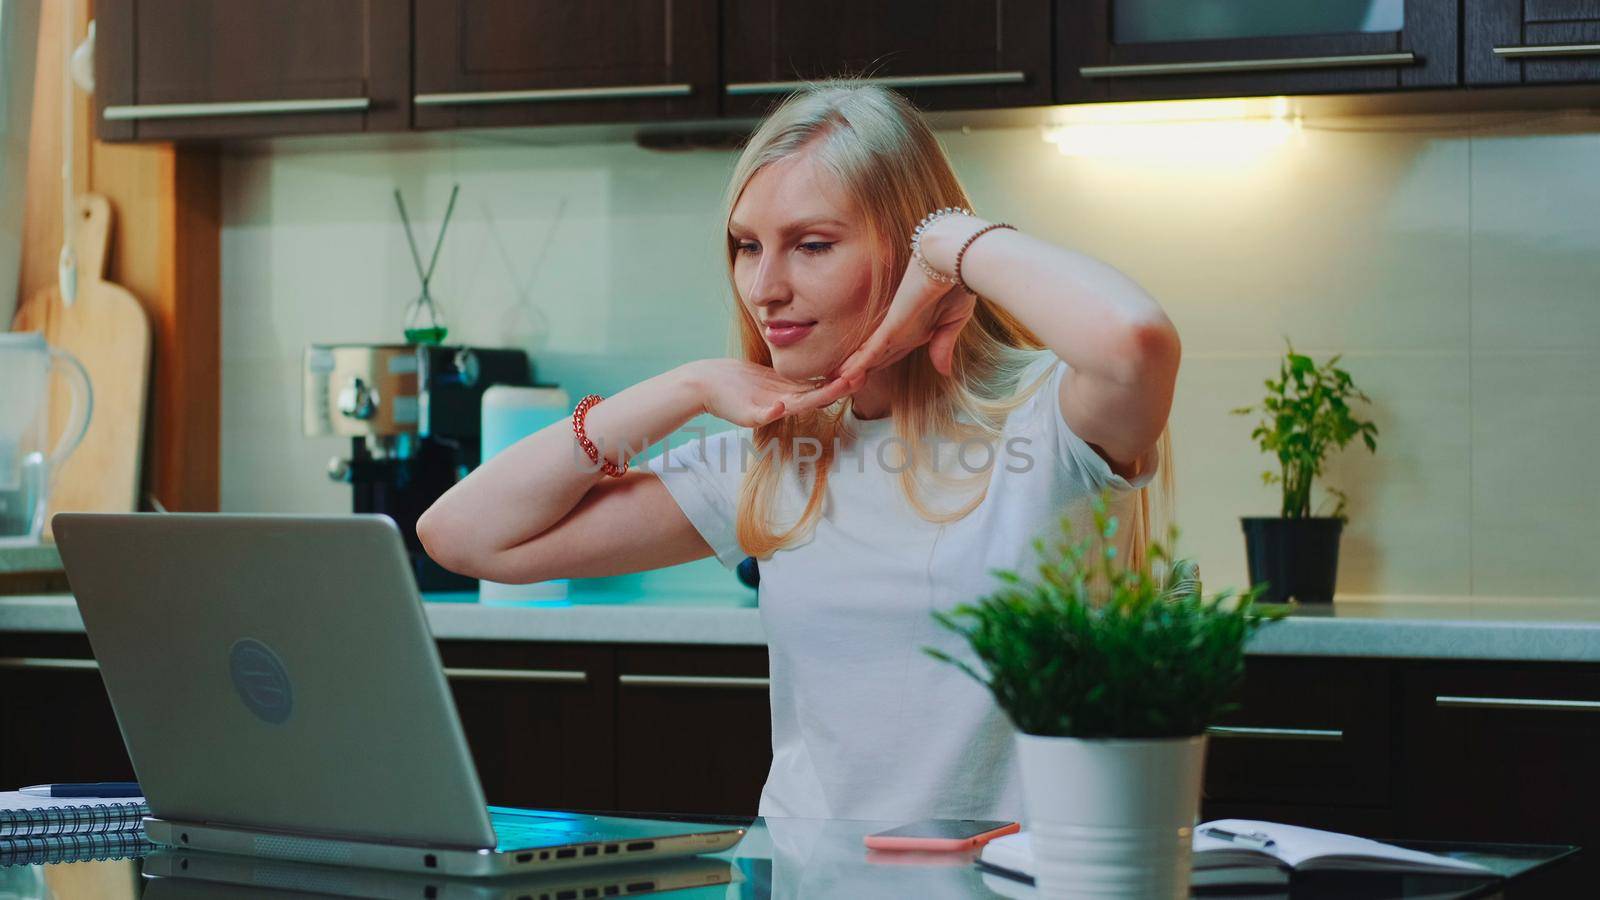 Blonde woman listening to the music and raising her arms in front of computer by art24pro